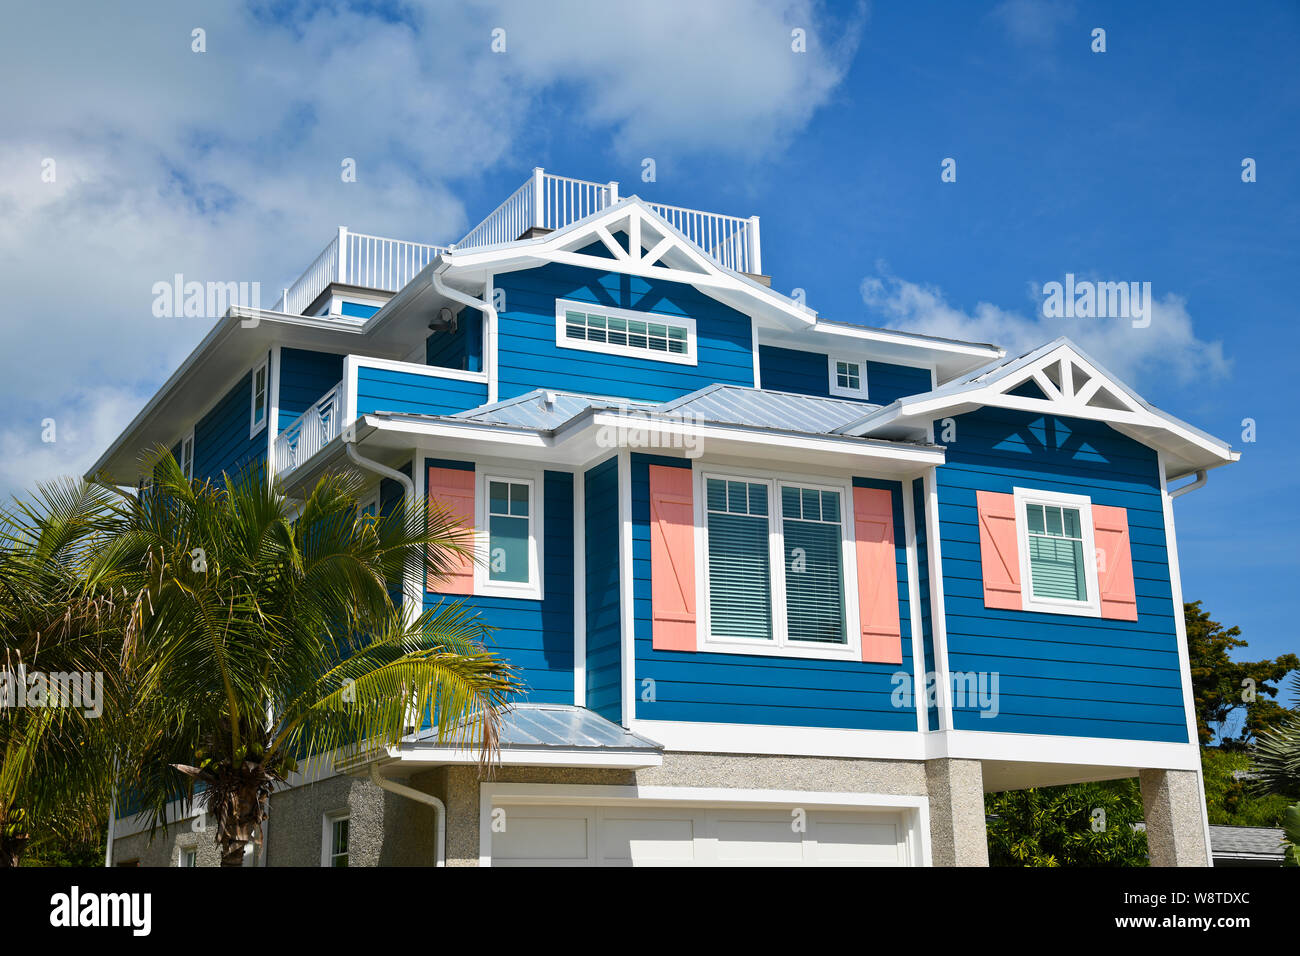 Large Beach House painted in dark blue with white trim and coral shutters. House has roof deck, garage and beautiful landscaping including Palm Trees Stock Photo